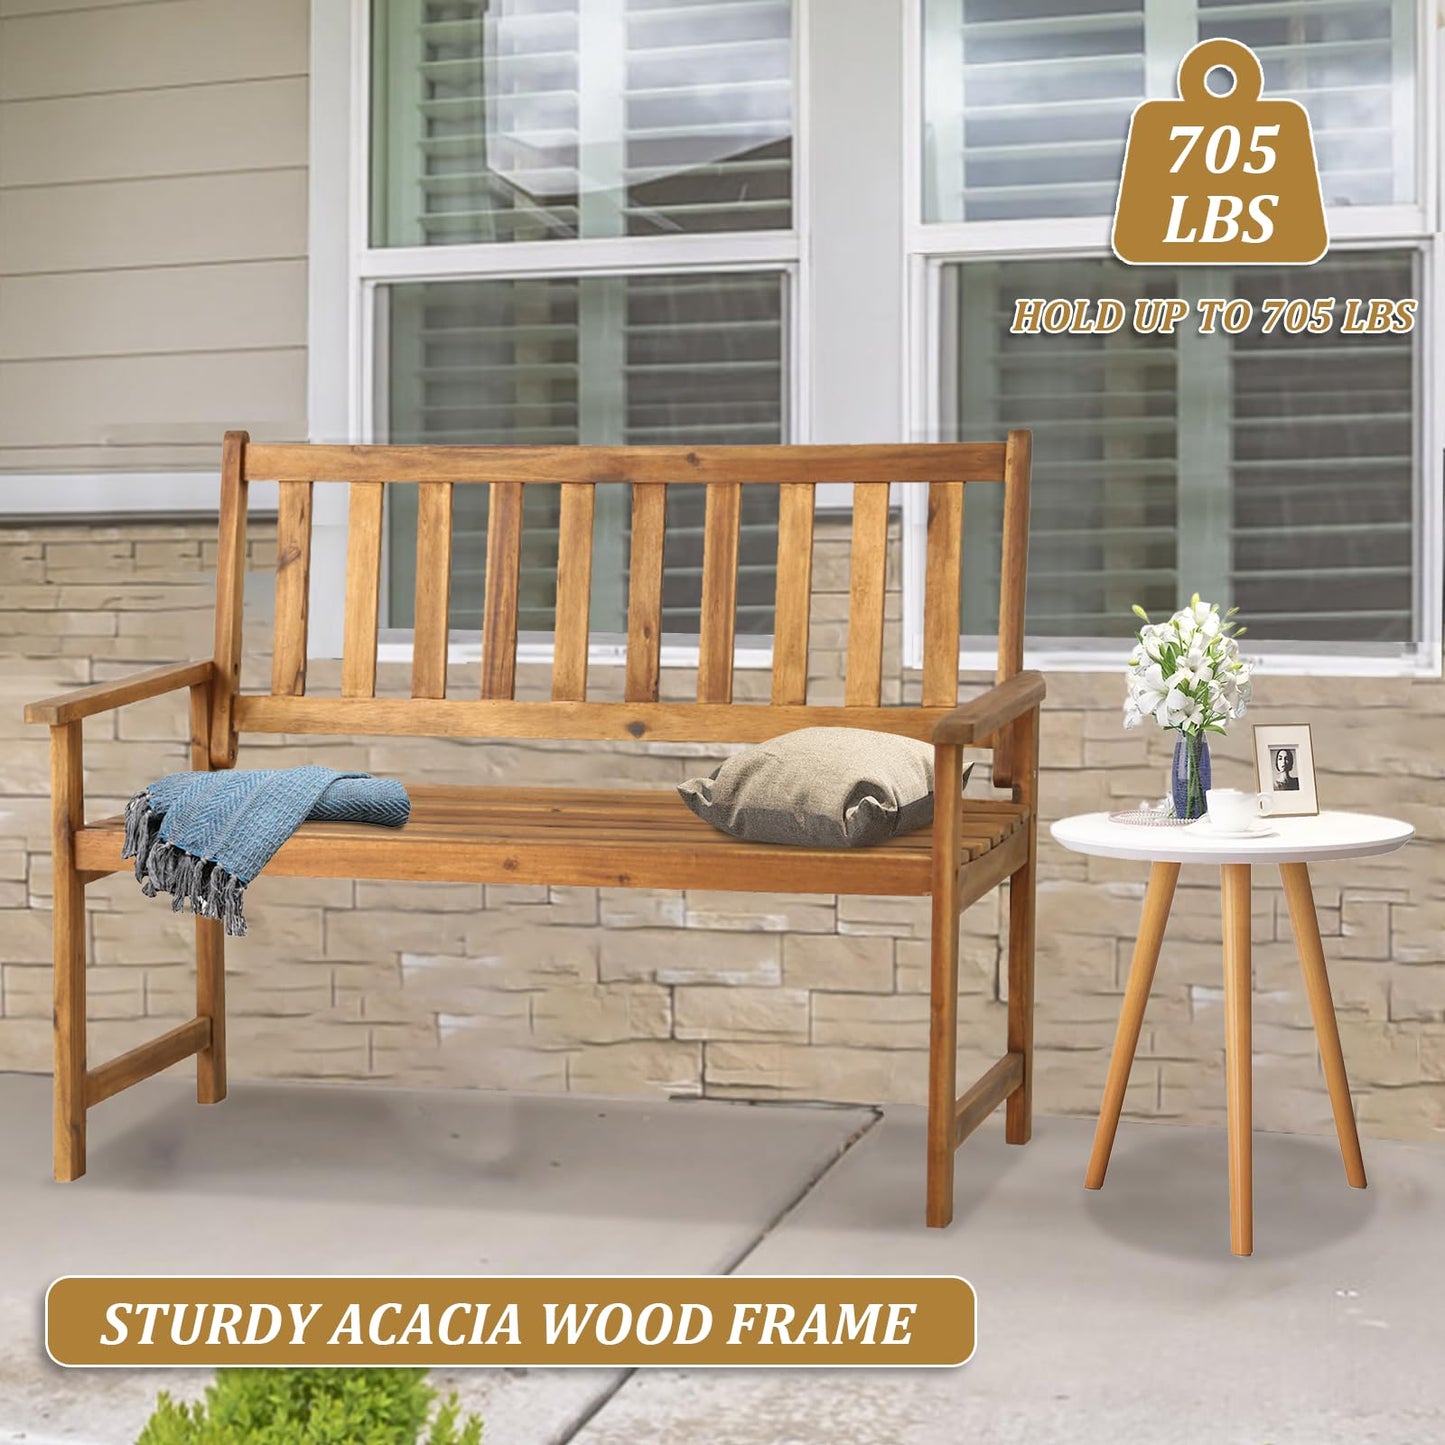 Yewuli Outdoor Wooden Bench,2-Person Garden Bench with Back and armrest, Acacia Wood Outdoor Bench Weatherproof for Patio,Front